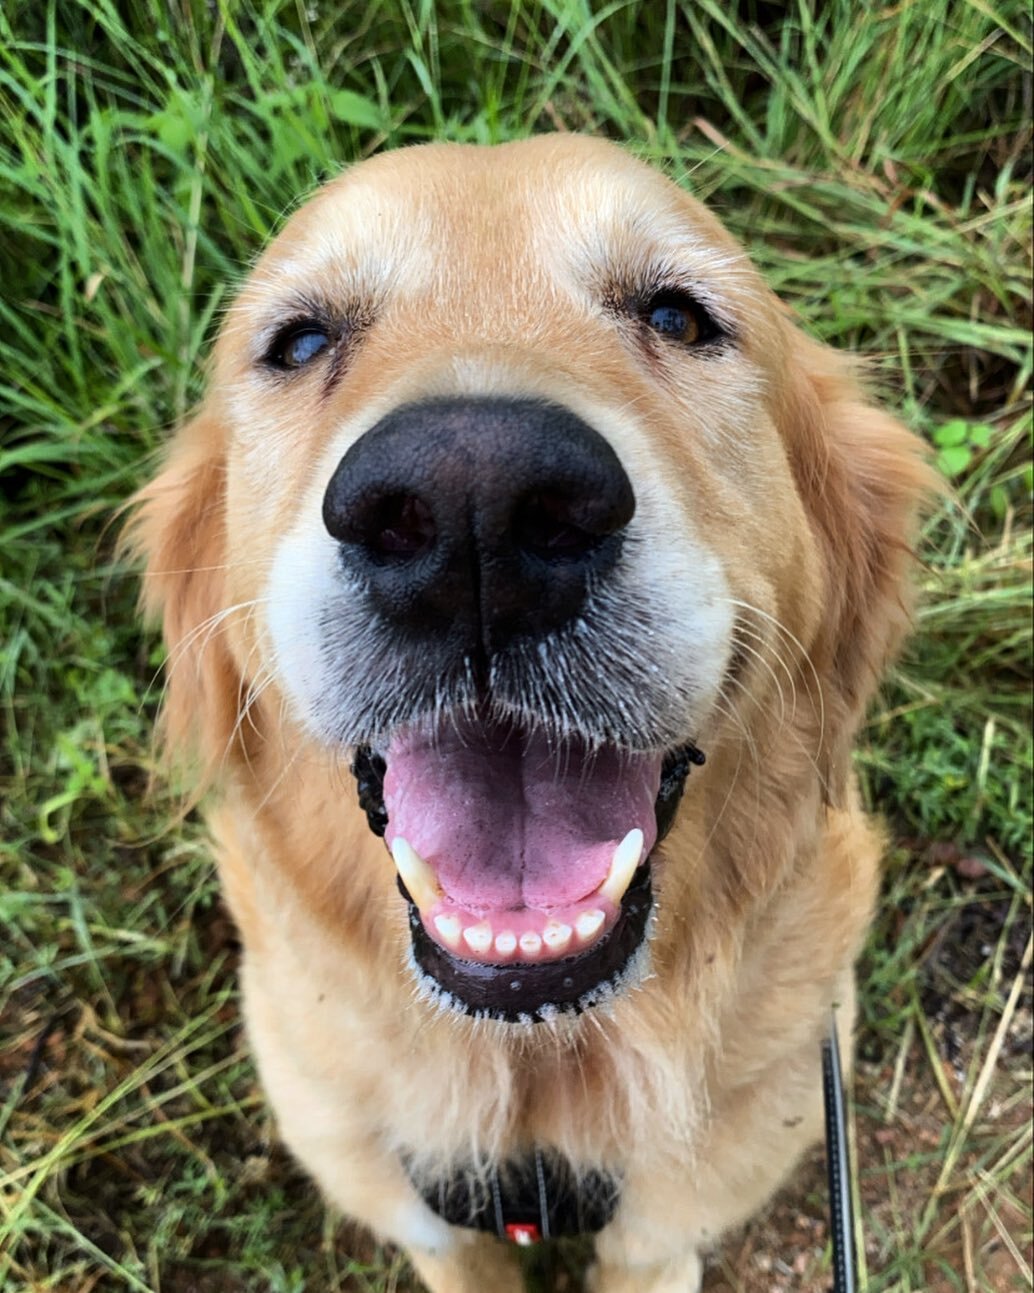 Golden Girl Zoey 🌼 The sweetest pupper you will ever meet ! Always smiling, eager to please and placid as can be 💕

#tailsontrailstsv #townsvillepetsitters #townsvilledogwalker #townsville #townsvillepetsitting #dogwalker #supportlocaltownsville #t